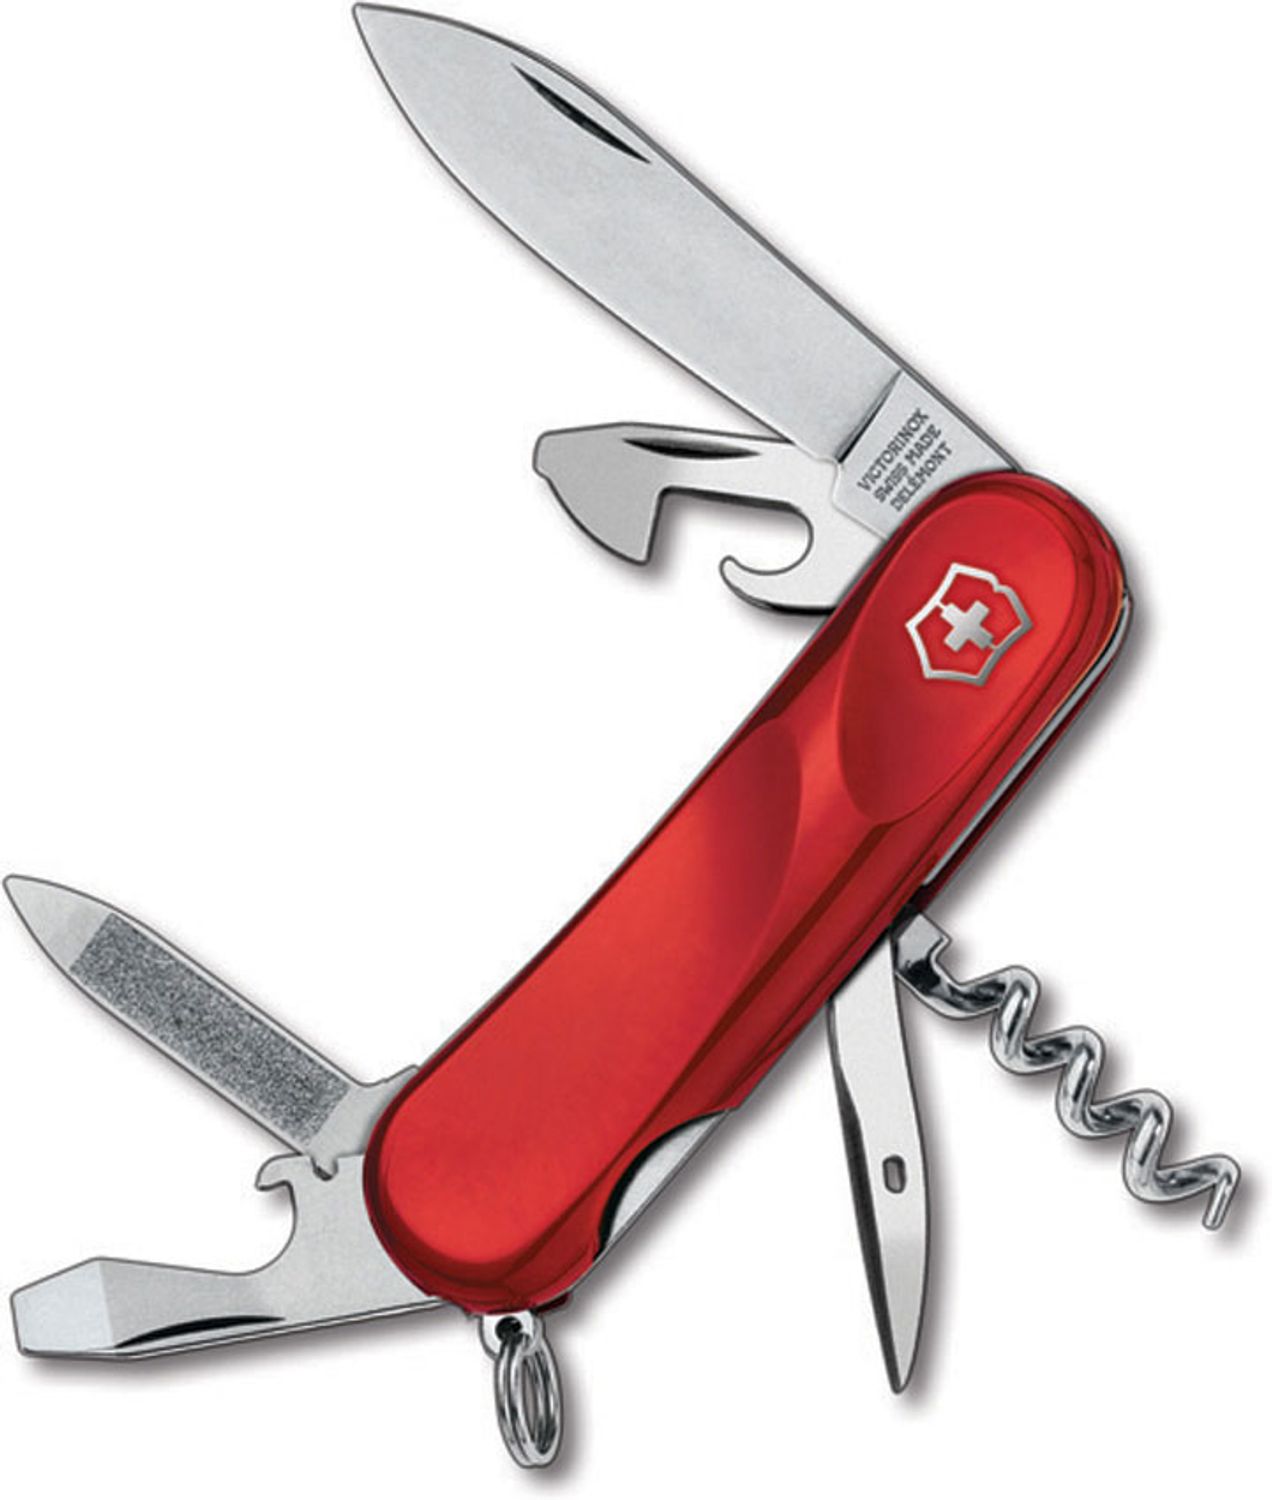 Victorinox Swiss Army Knife Evolution 10 Red 2.3803.EUS2 13 Function New In Box 